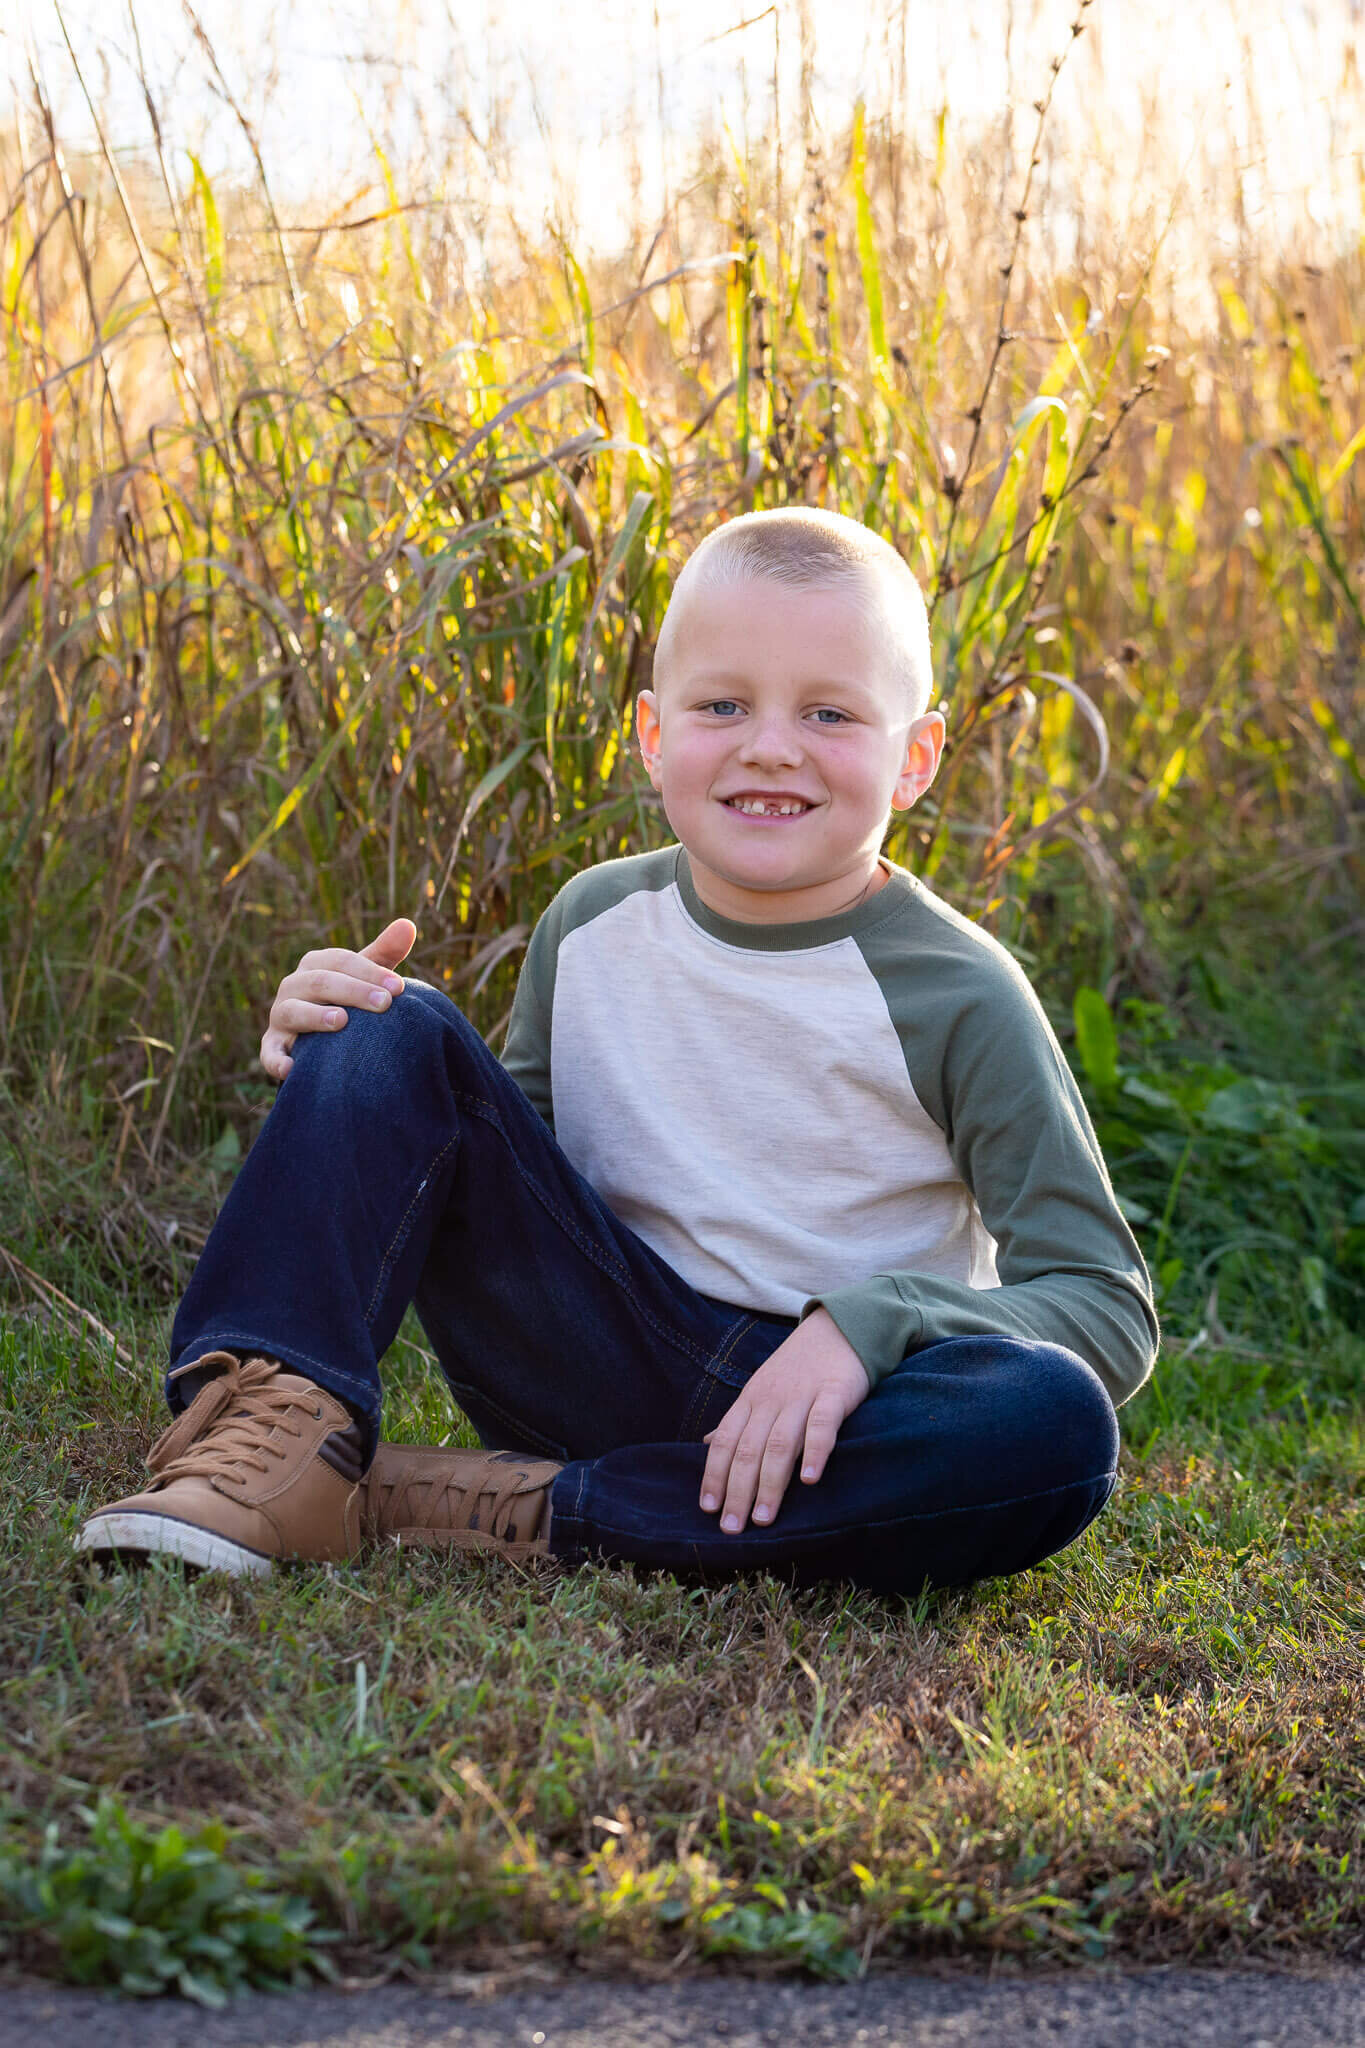 A boy sitting in the grass at a park at sunset.